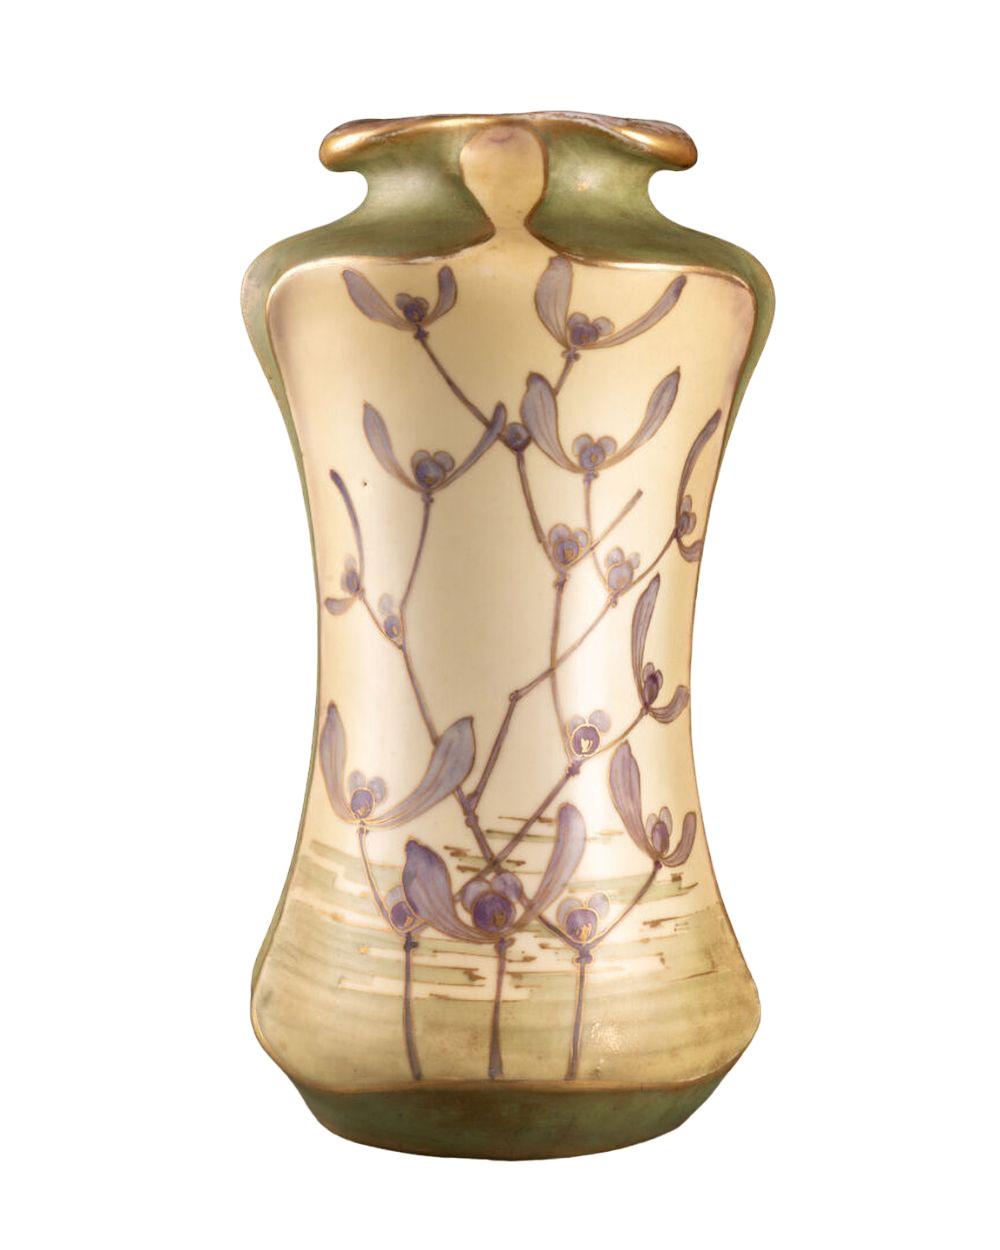 VASE in a stylized plant shape with a hemmed neck Decor of flowering stems against a backdrop of a lake landscape in reserve Glazed ceramic.

Marked on underside Turn Teplitz Bohemia, RStK Made in Austria (for Riessner, Stellmacher & Kessel, mark